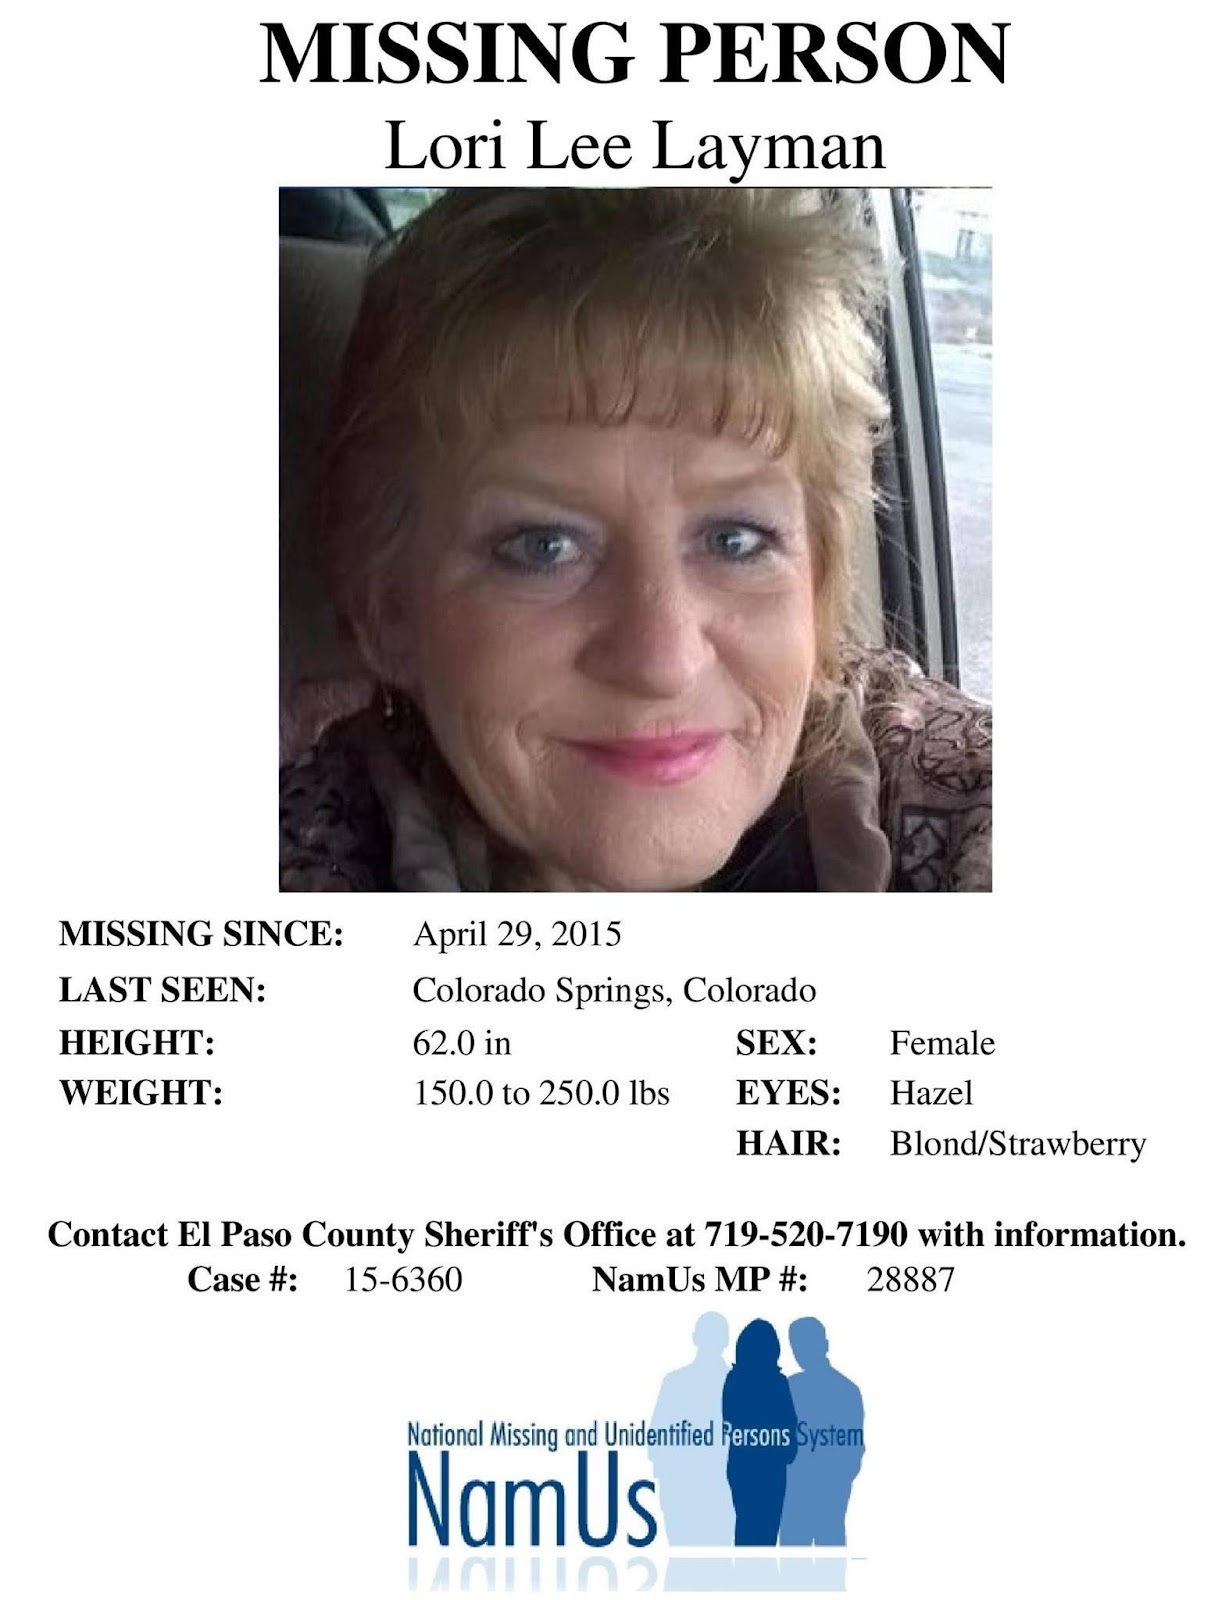 Missing person flyer from National Missing and Unidentified Person System, NamUs of Lori Lee Layman.